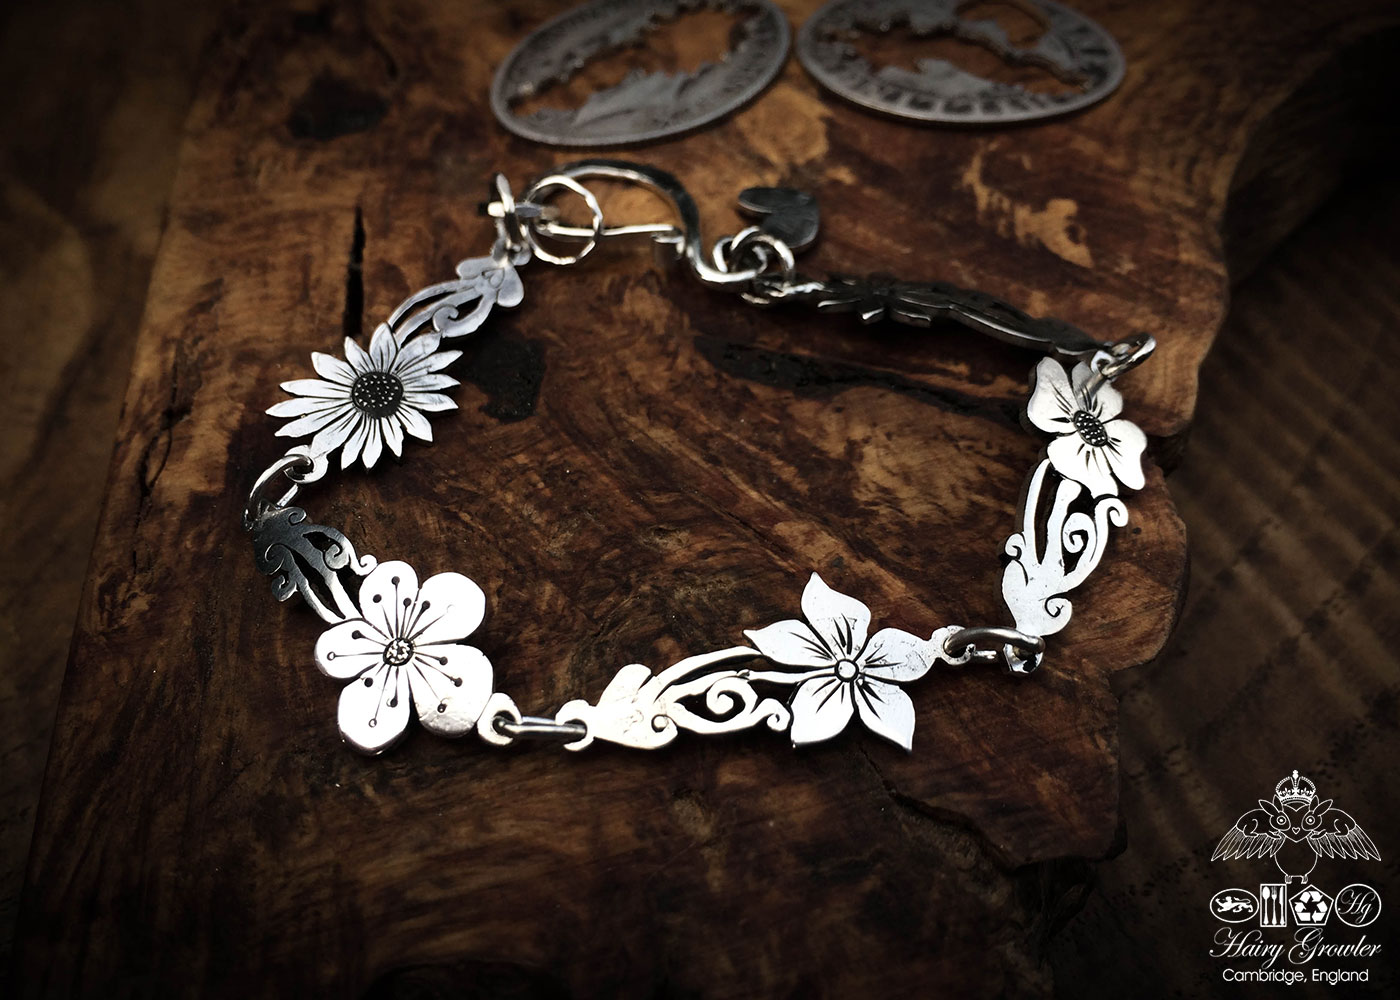 Wild flower bracelet made from recycled sterling silver coins